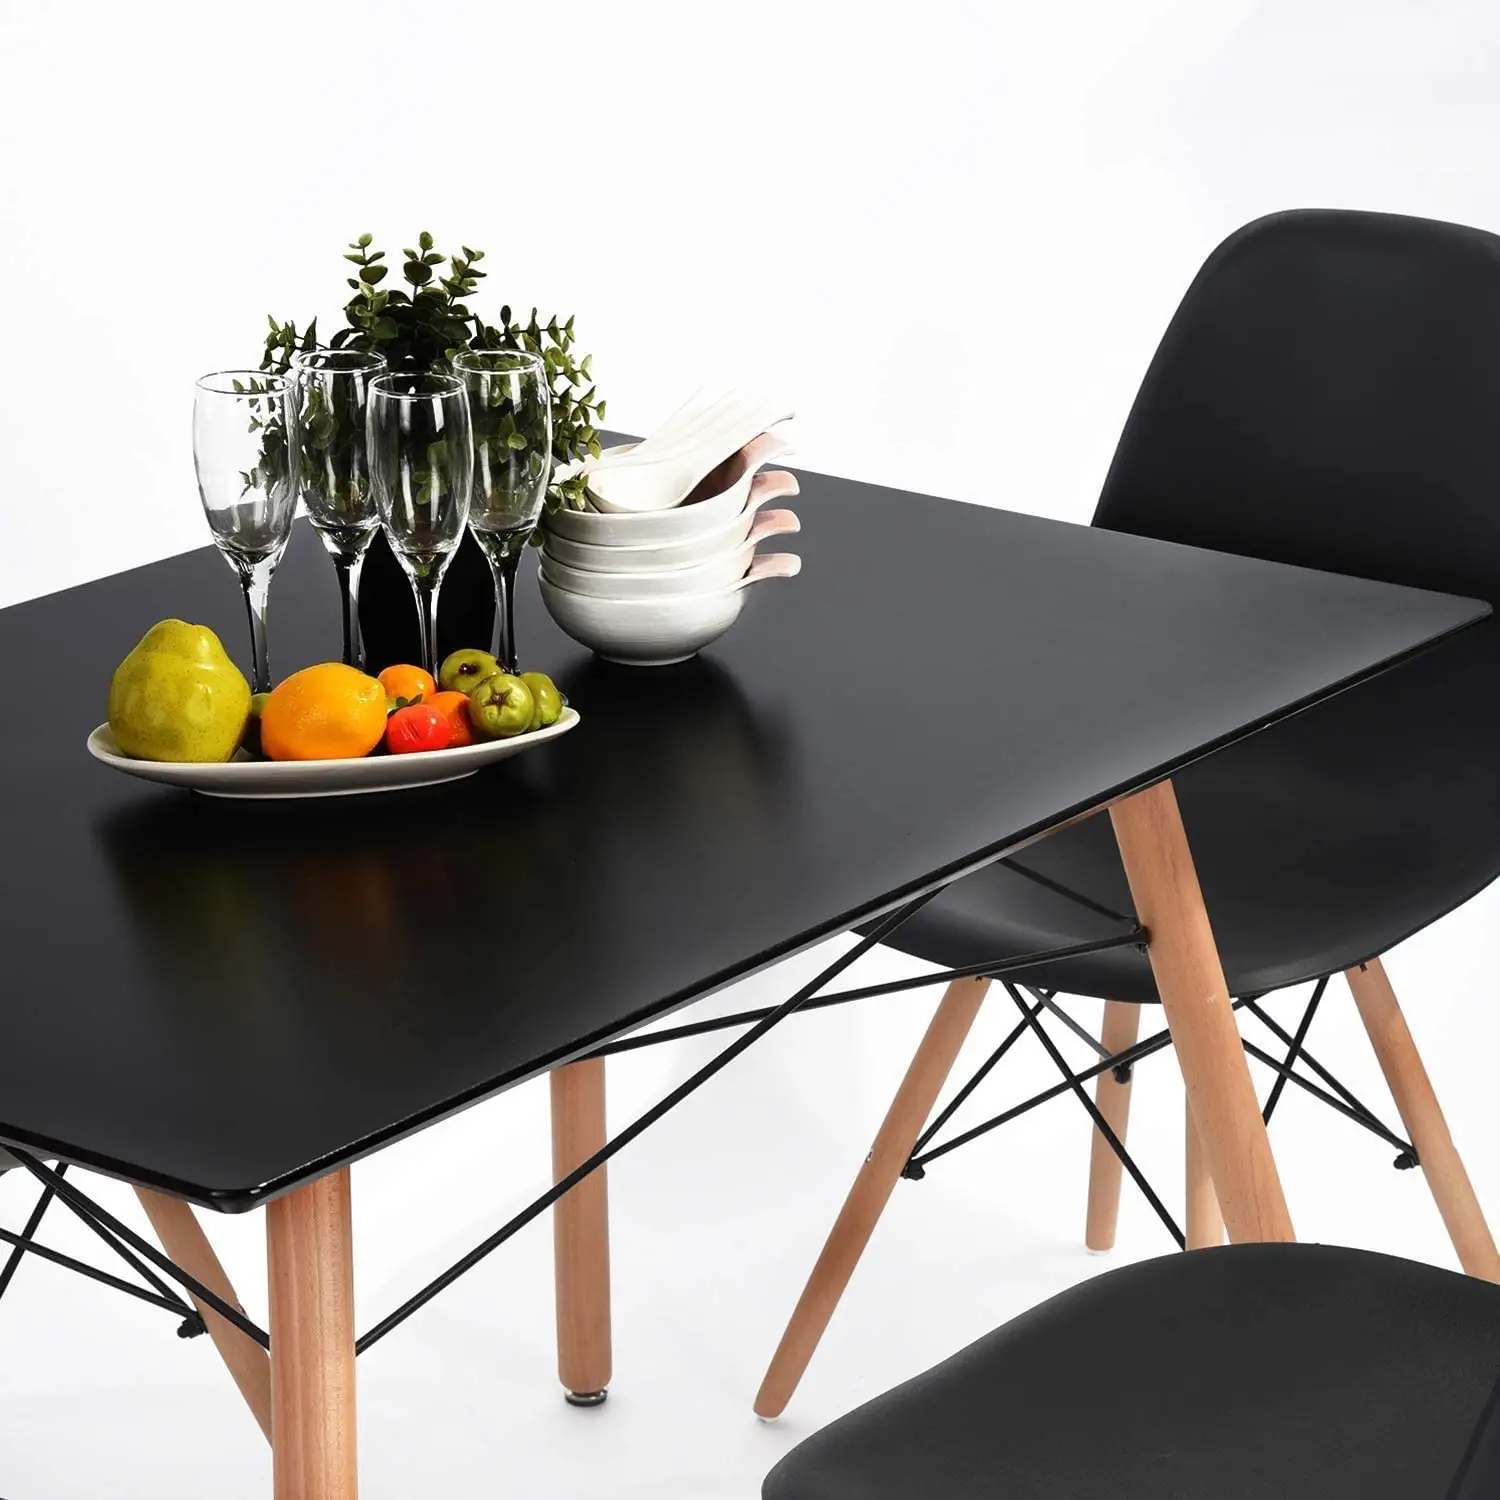 Black Dining Table Wooden Table With Modern Design For Home And Kitchen